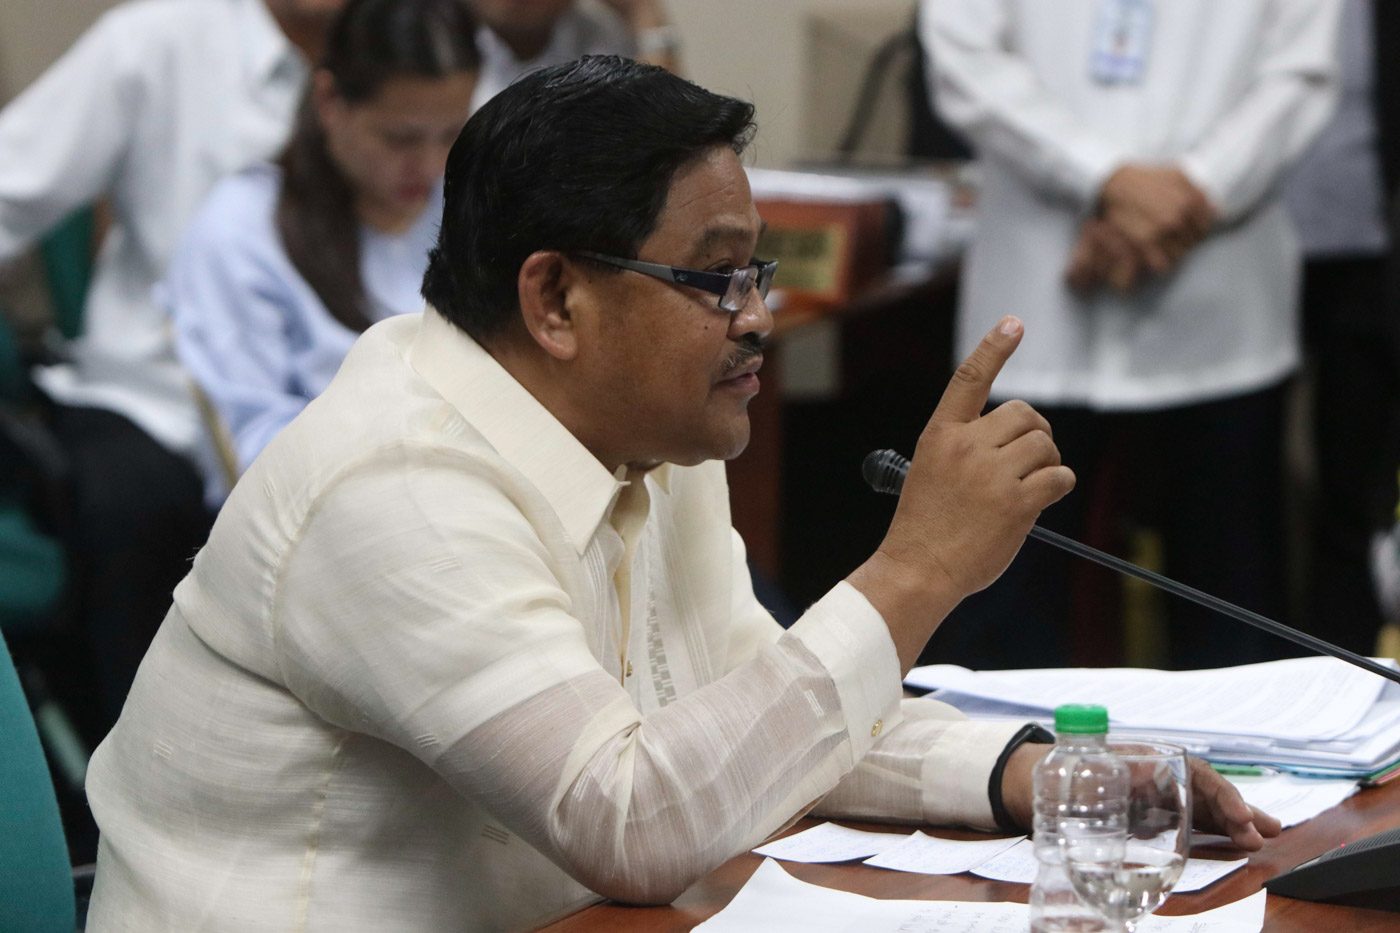 After 2 hearings, Mariano not worried about fate at CA